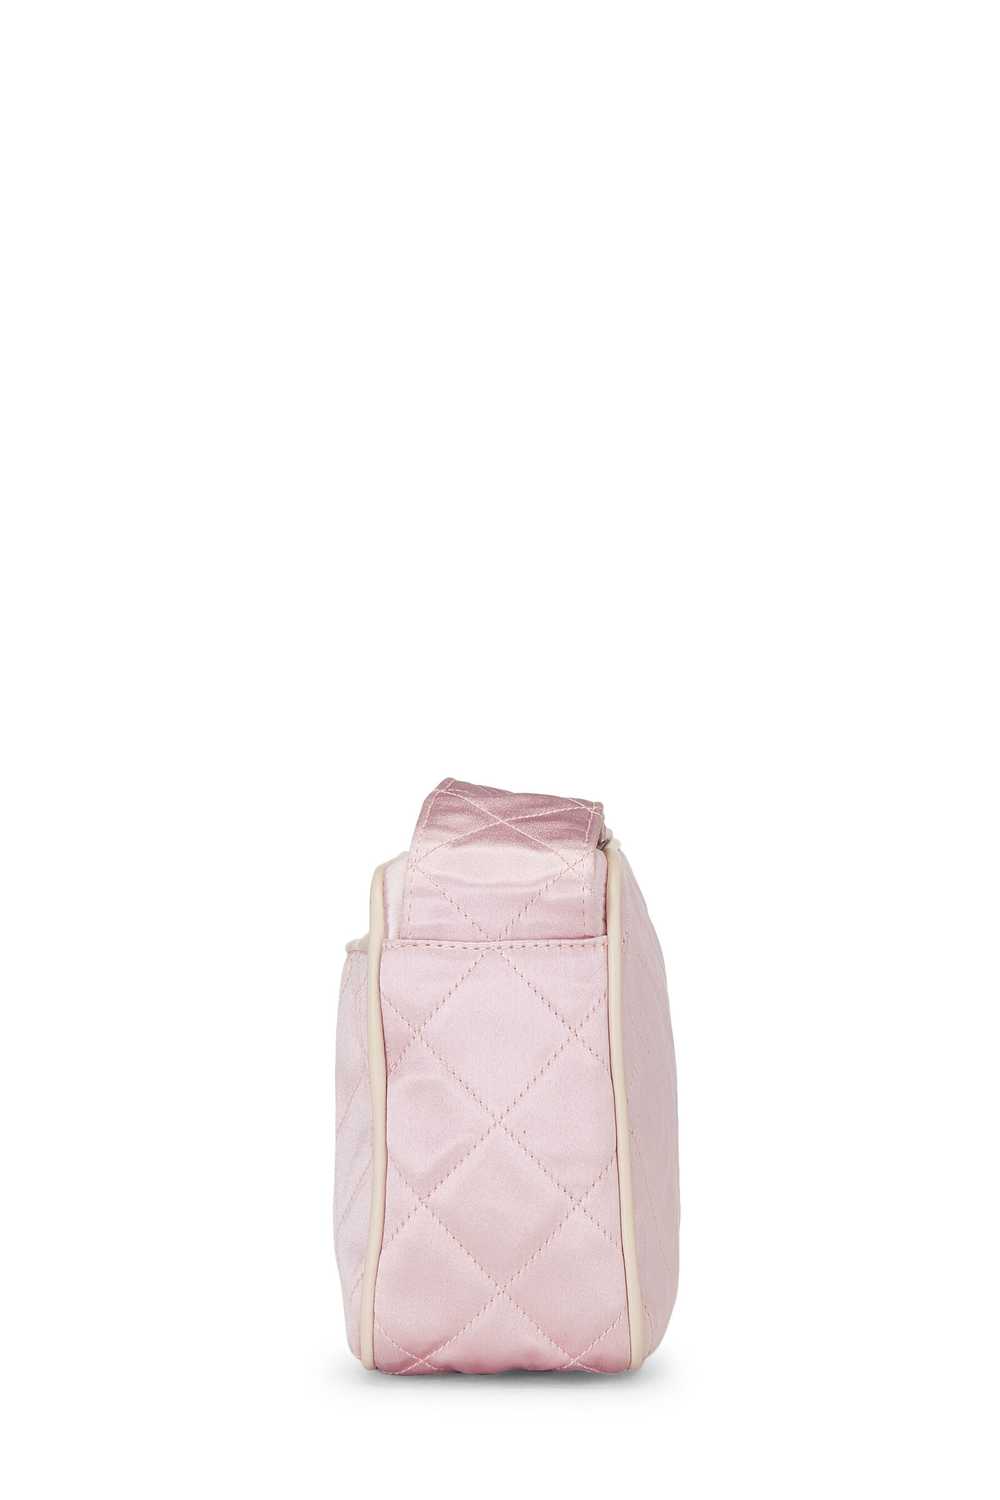 Pink Quilted Satin 'CC' Shoulder Bag Small - image 5